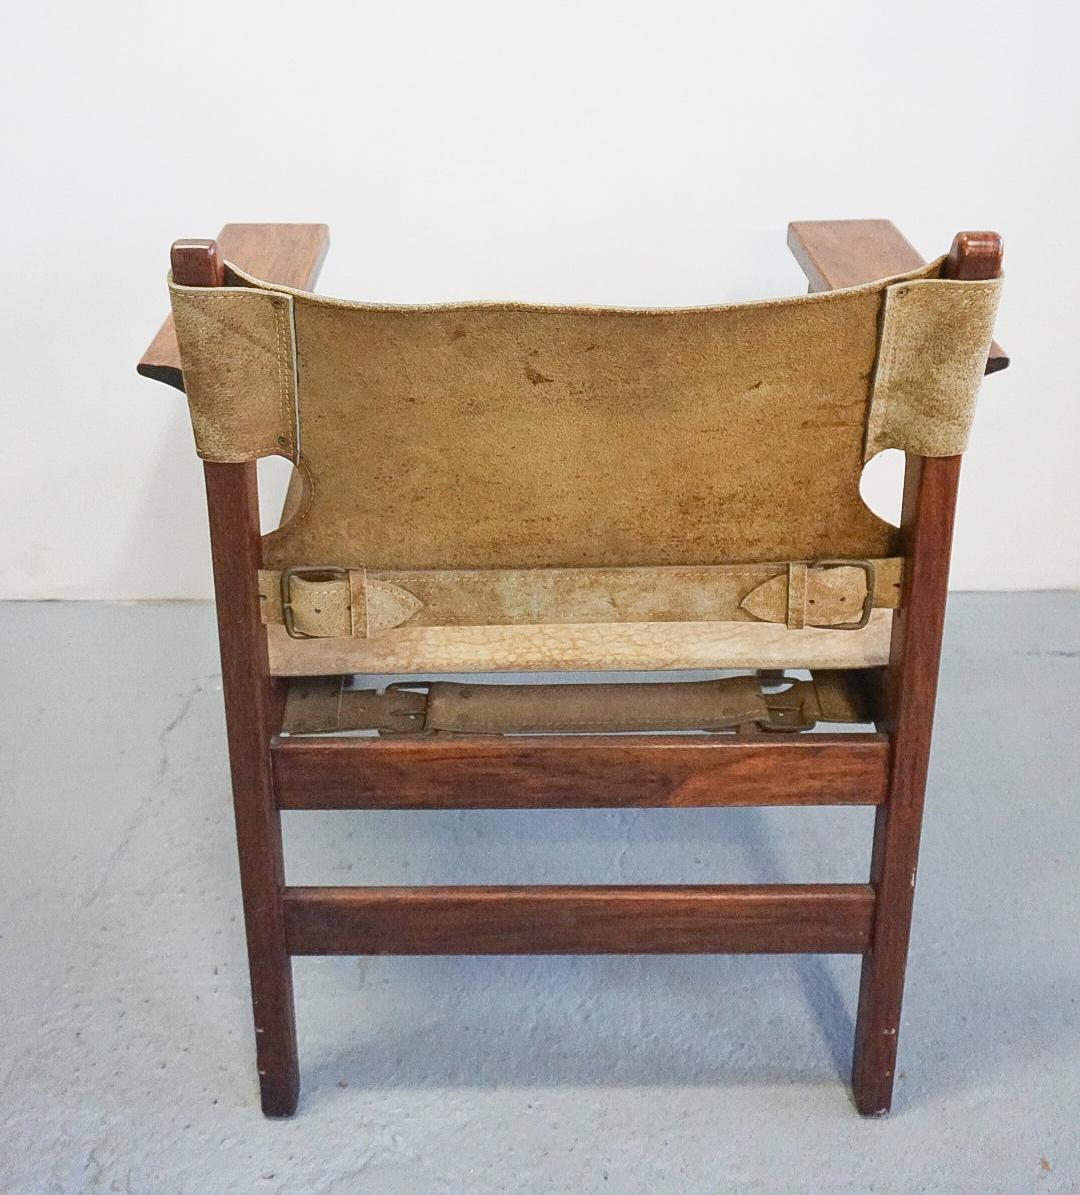 Brass Borge Mogensen style leather sling chair